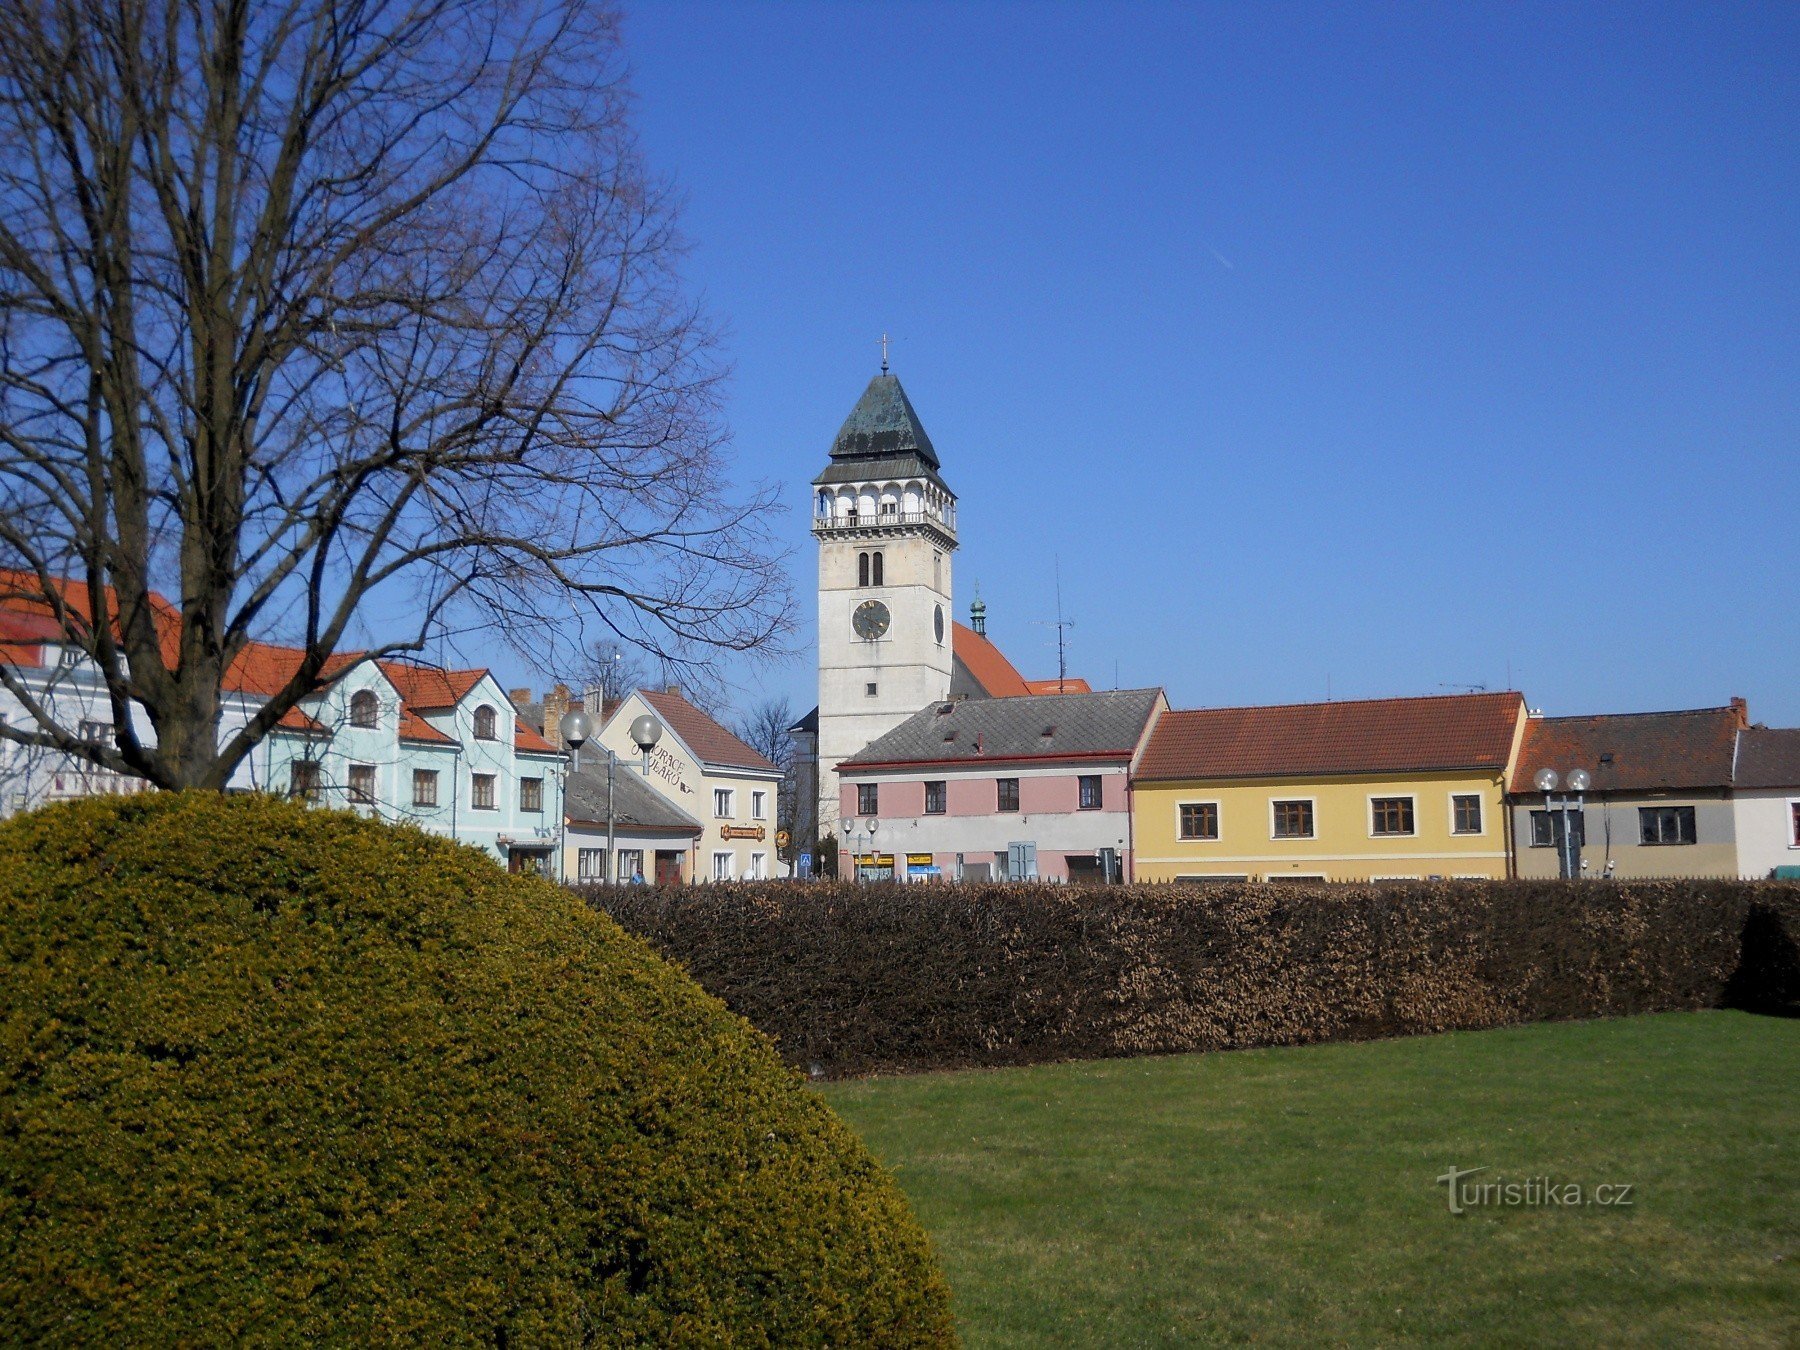 Church of St. Vavřince from the castle